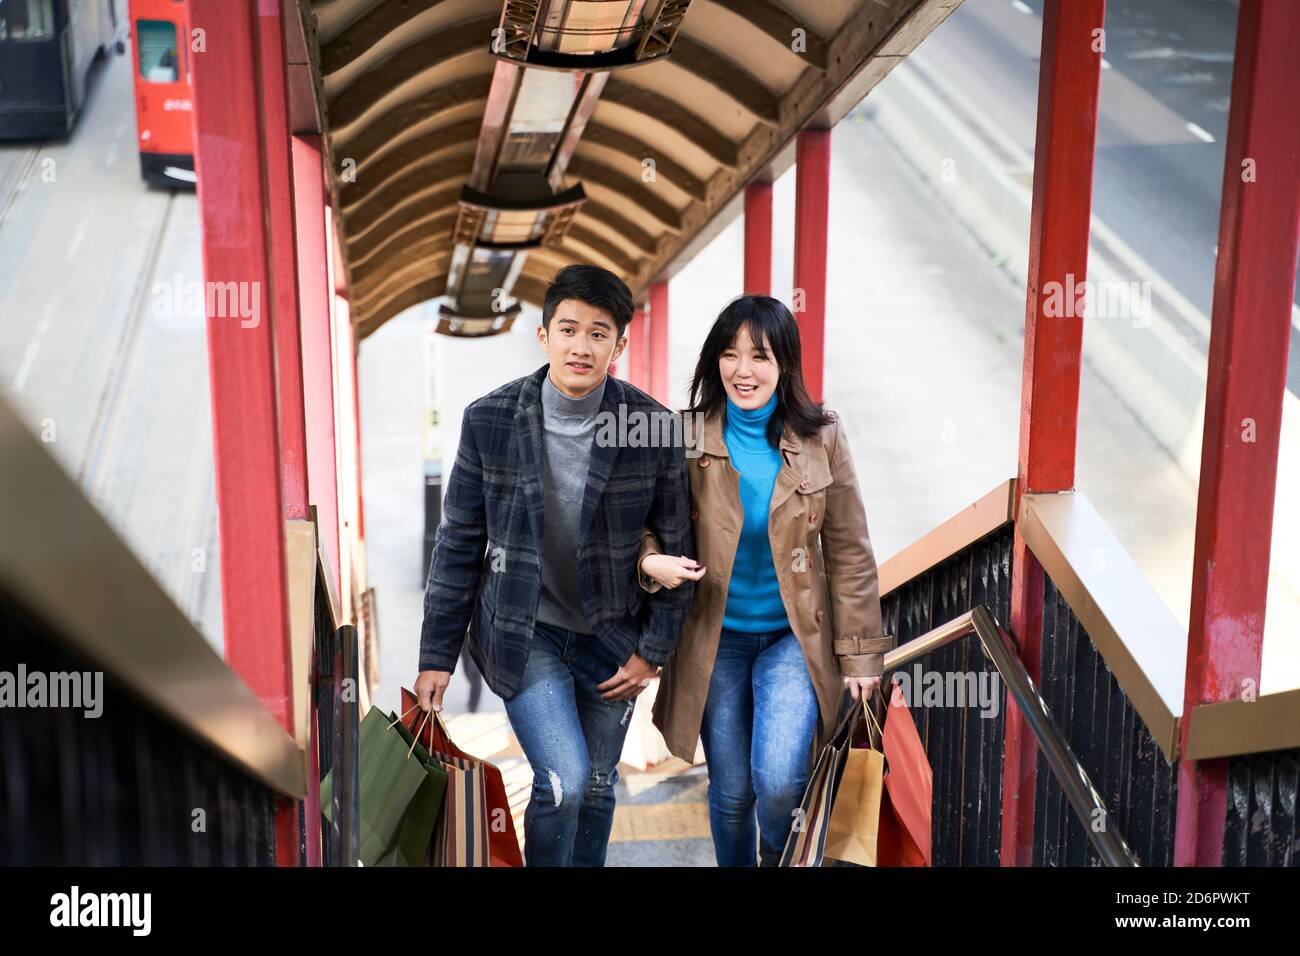 young asian couple holding shopping bags ascending a pedestrian overpass Stock Photo